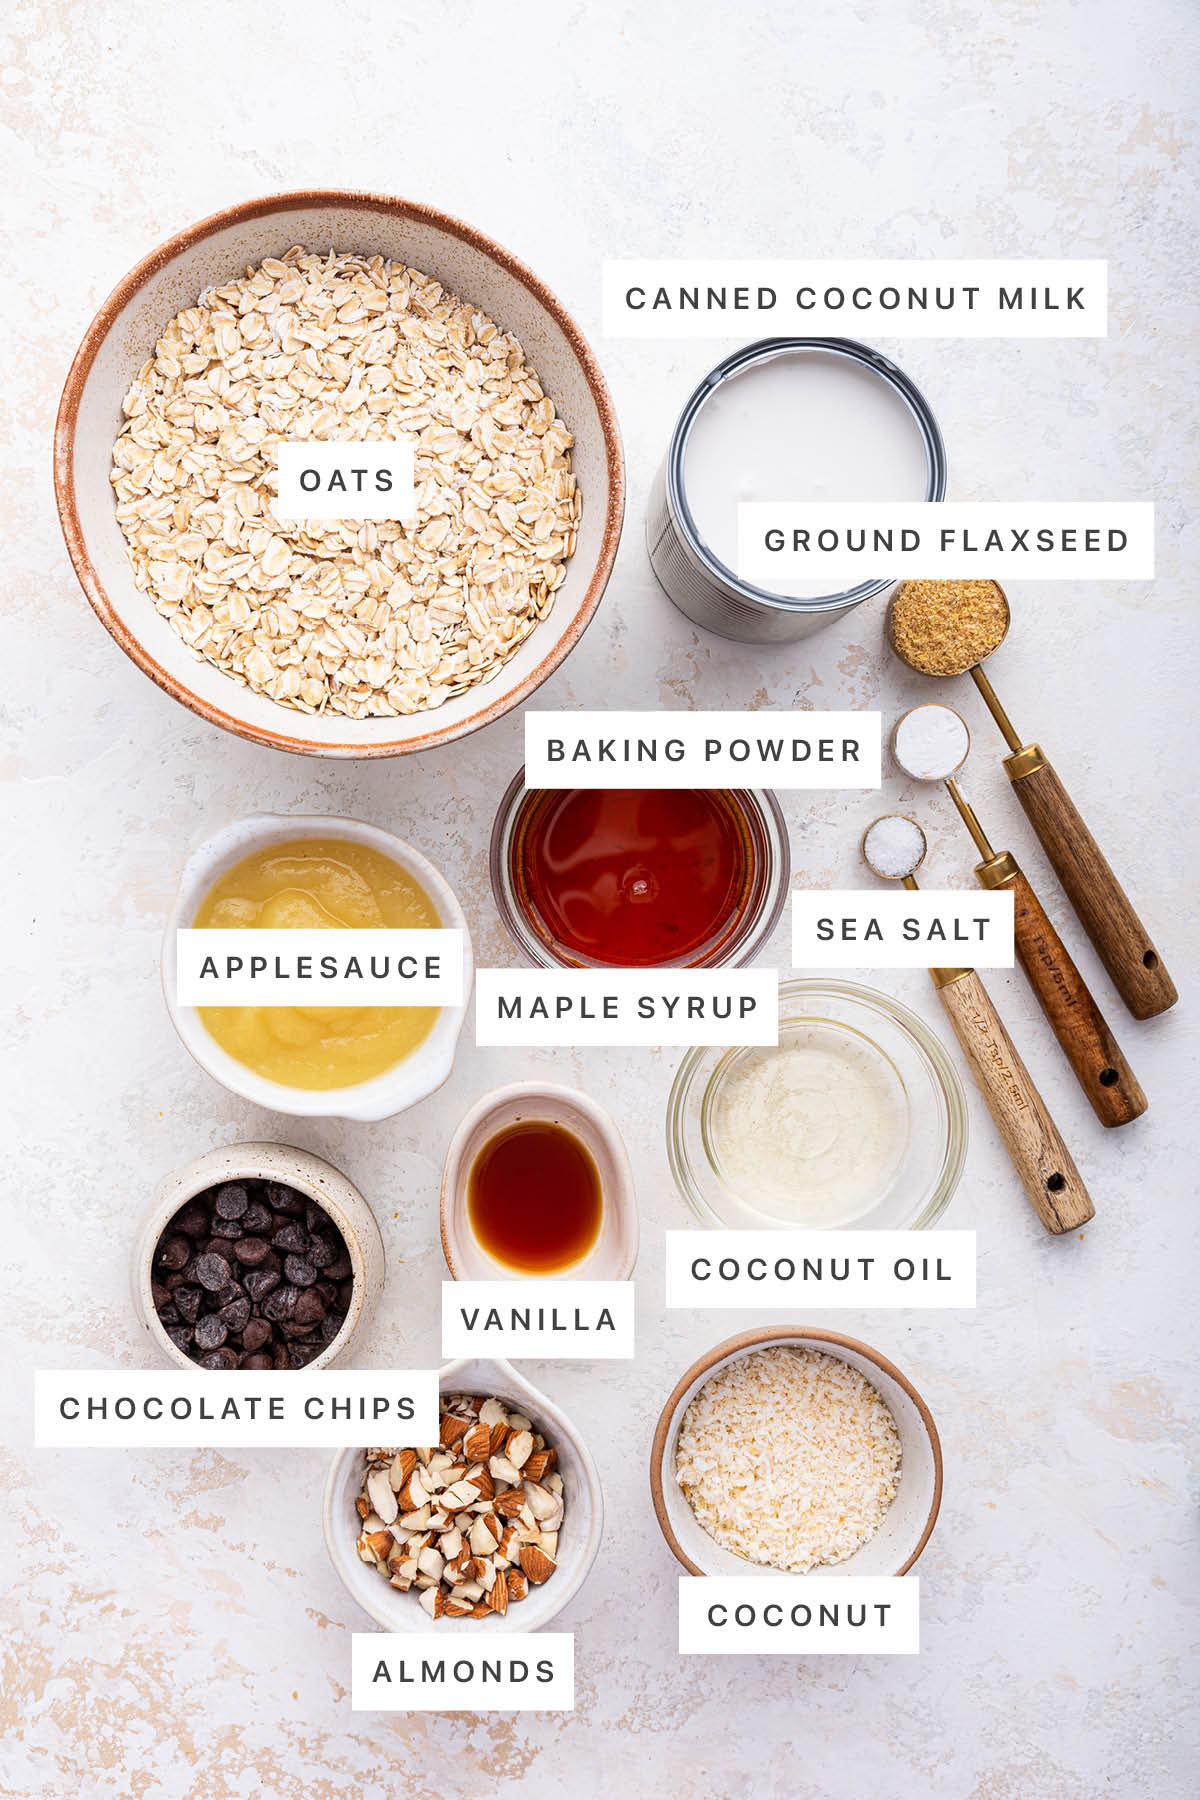 Ingredients measured out to make Almond Joy Baked Oatmeal: oats, canned coconut milk, ground flaxseed, baking powder, sea salt, maple syrup, applesauce, vanilla, coconut oil, chocolate chips, almonds and coconut.